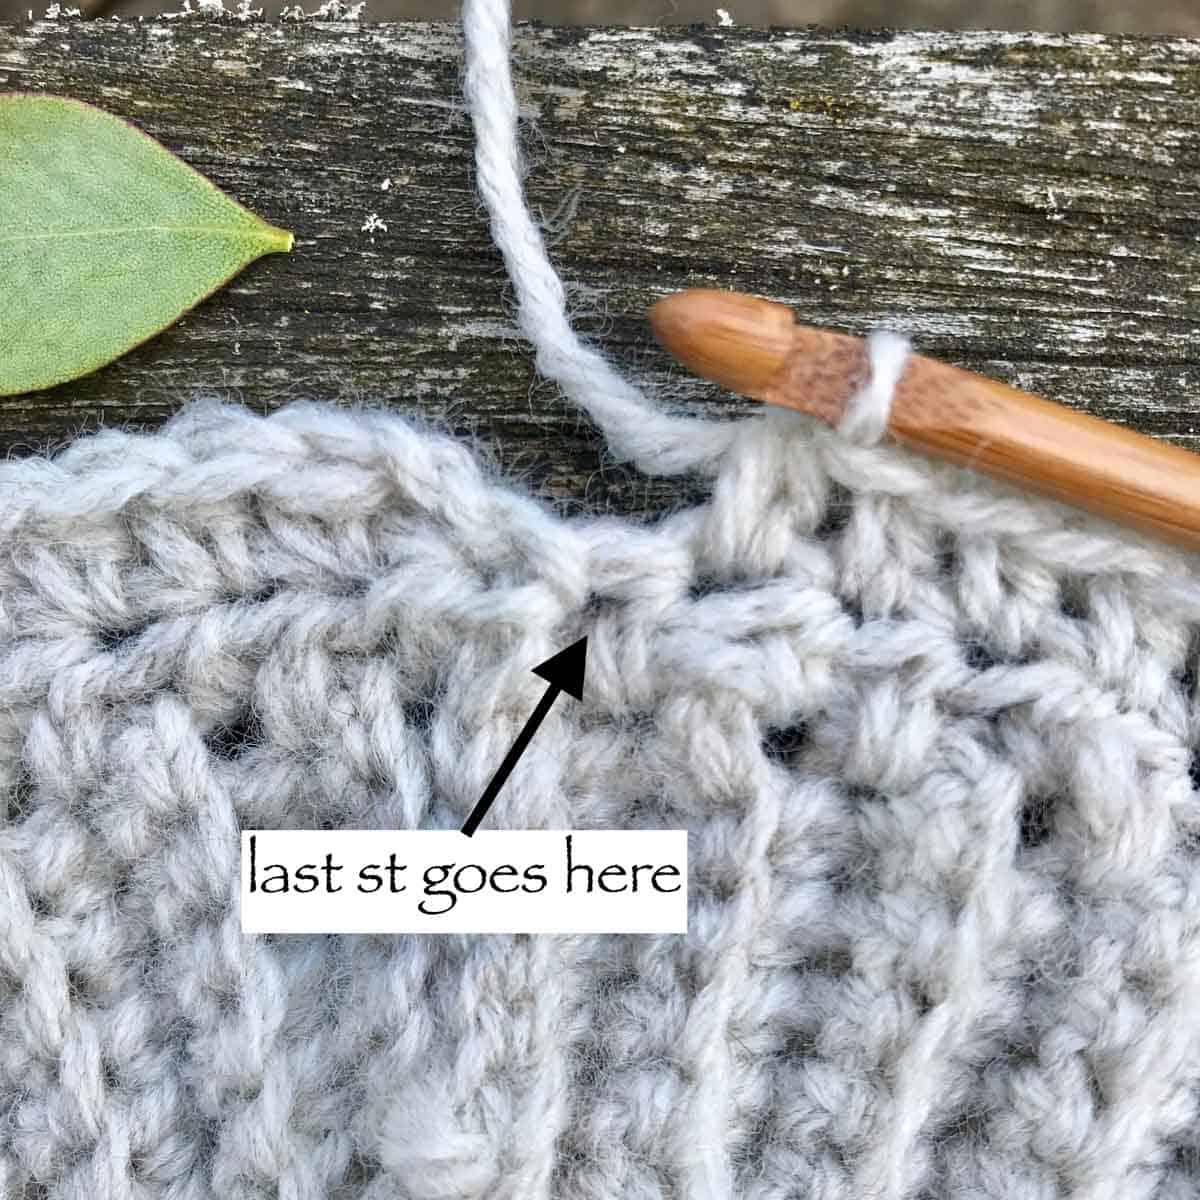 Crochet tutorial photo shows where to put your crochet hook when stitching.